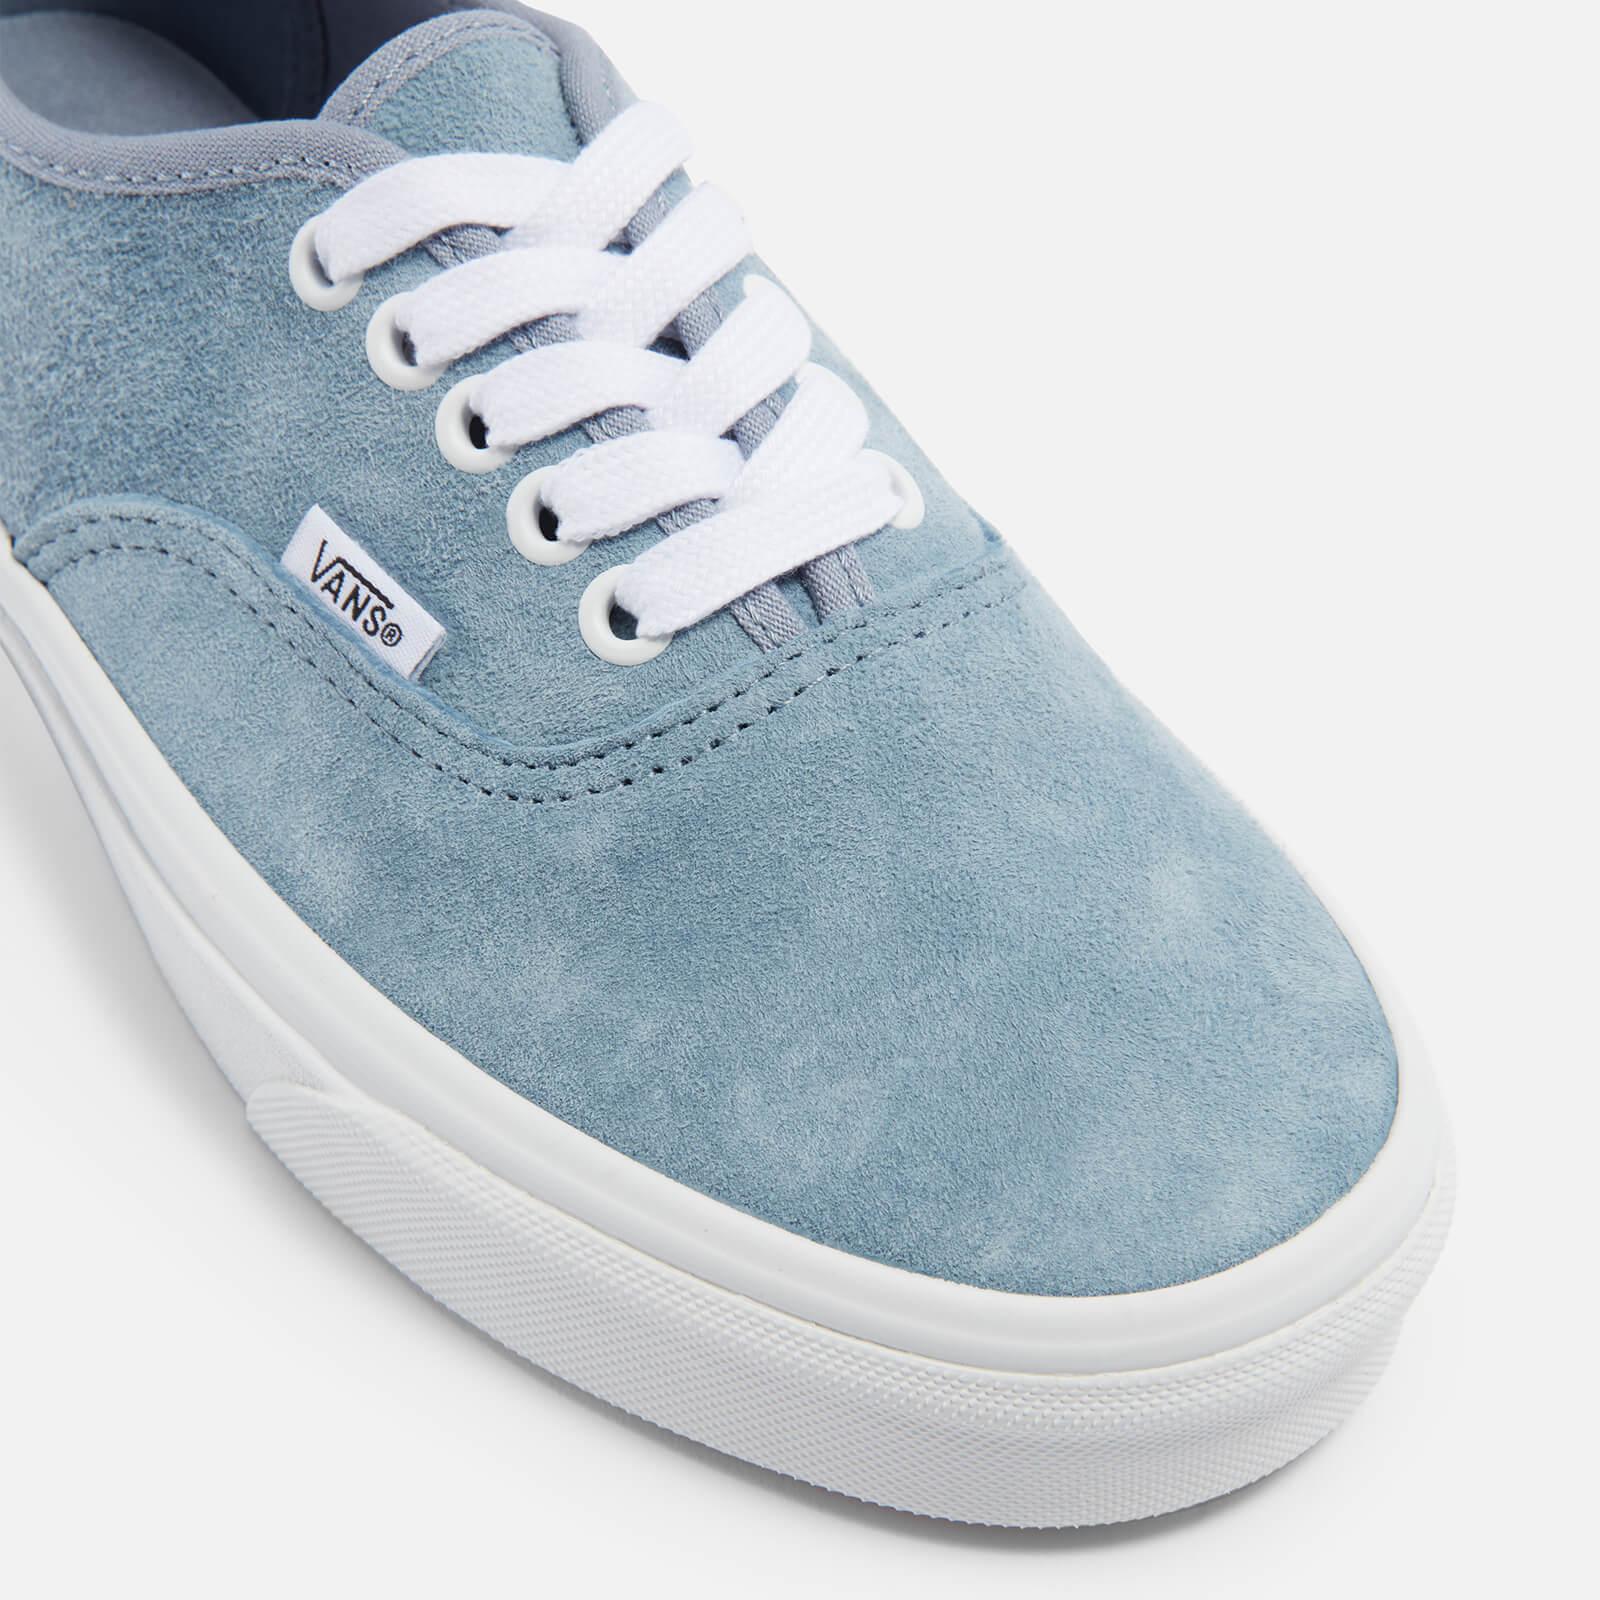 Banyan harpun Vellykket Vans Authentic Suede Trainers in Blue | Lyst